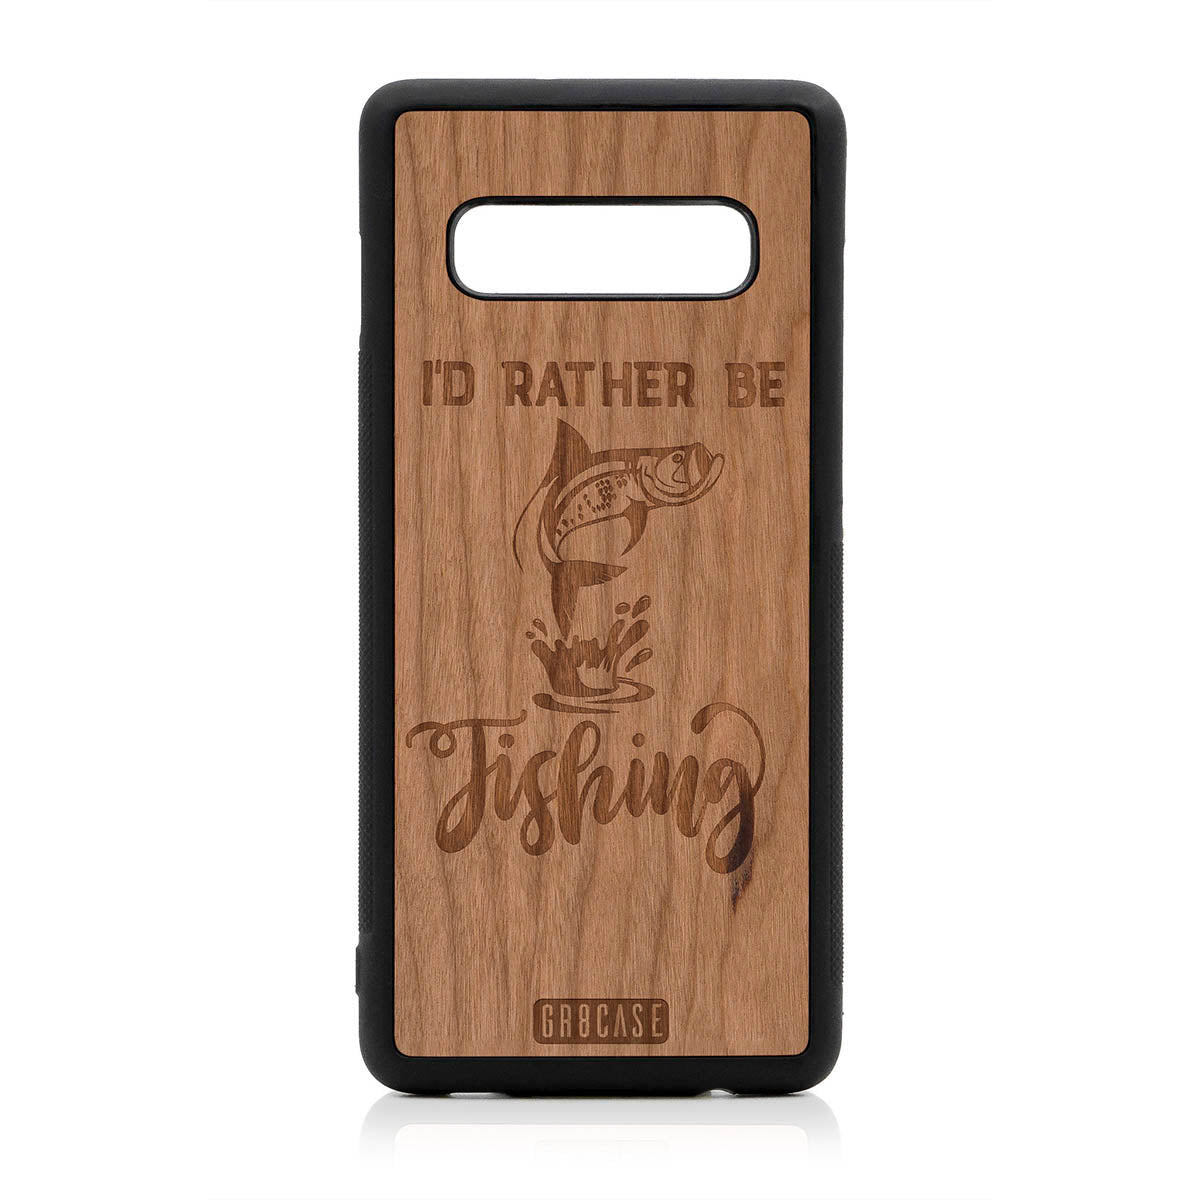 I'D Rather Be Fishing Design Wood Case For Samsung Galaxy S10 Plus